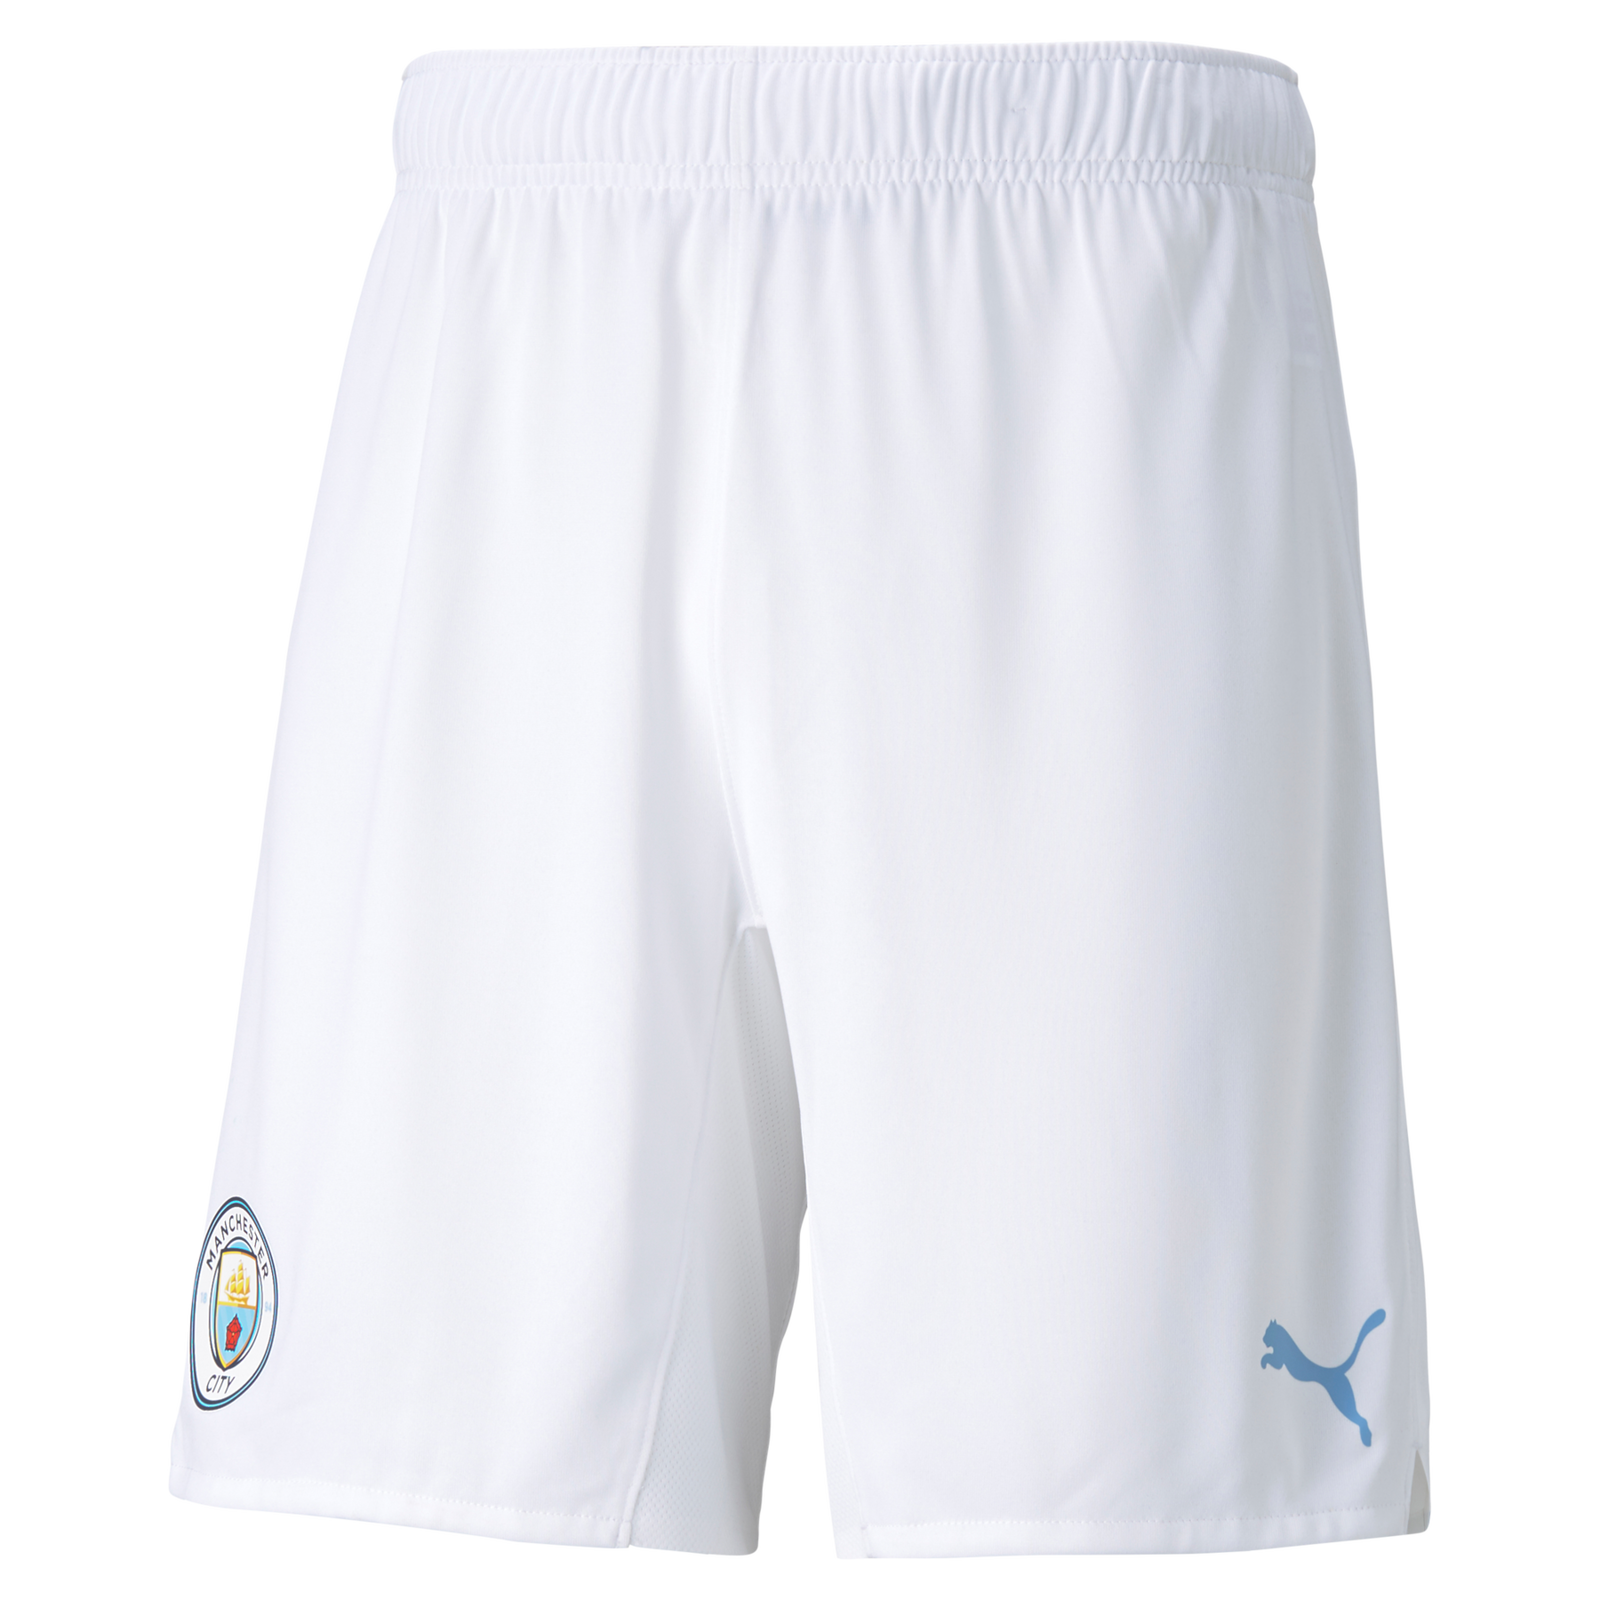 Manchester City Authentic Football Shorts 21/22 | Official Man City Store